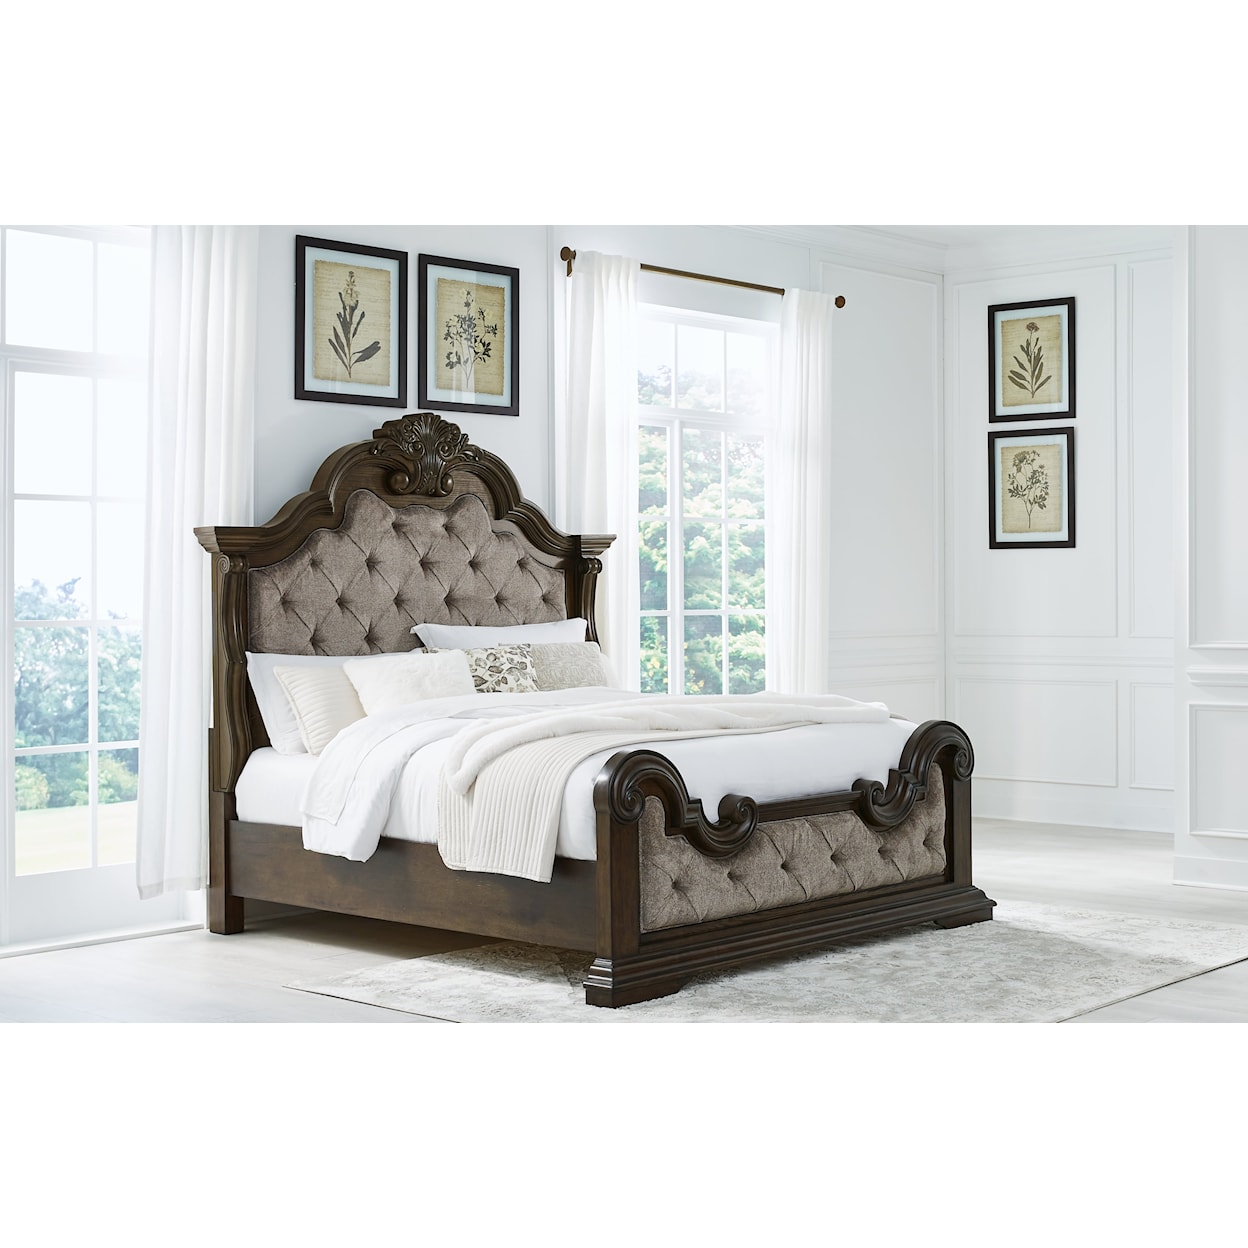 Signature Maylee California King Upholstered Bed